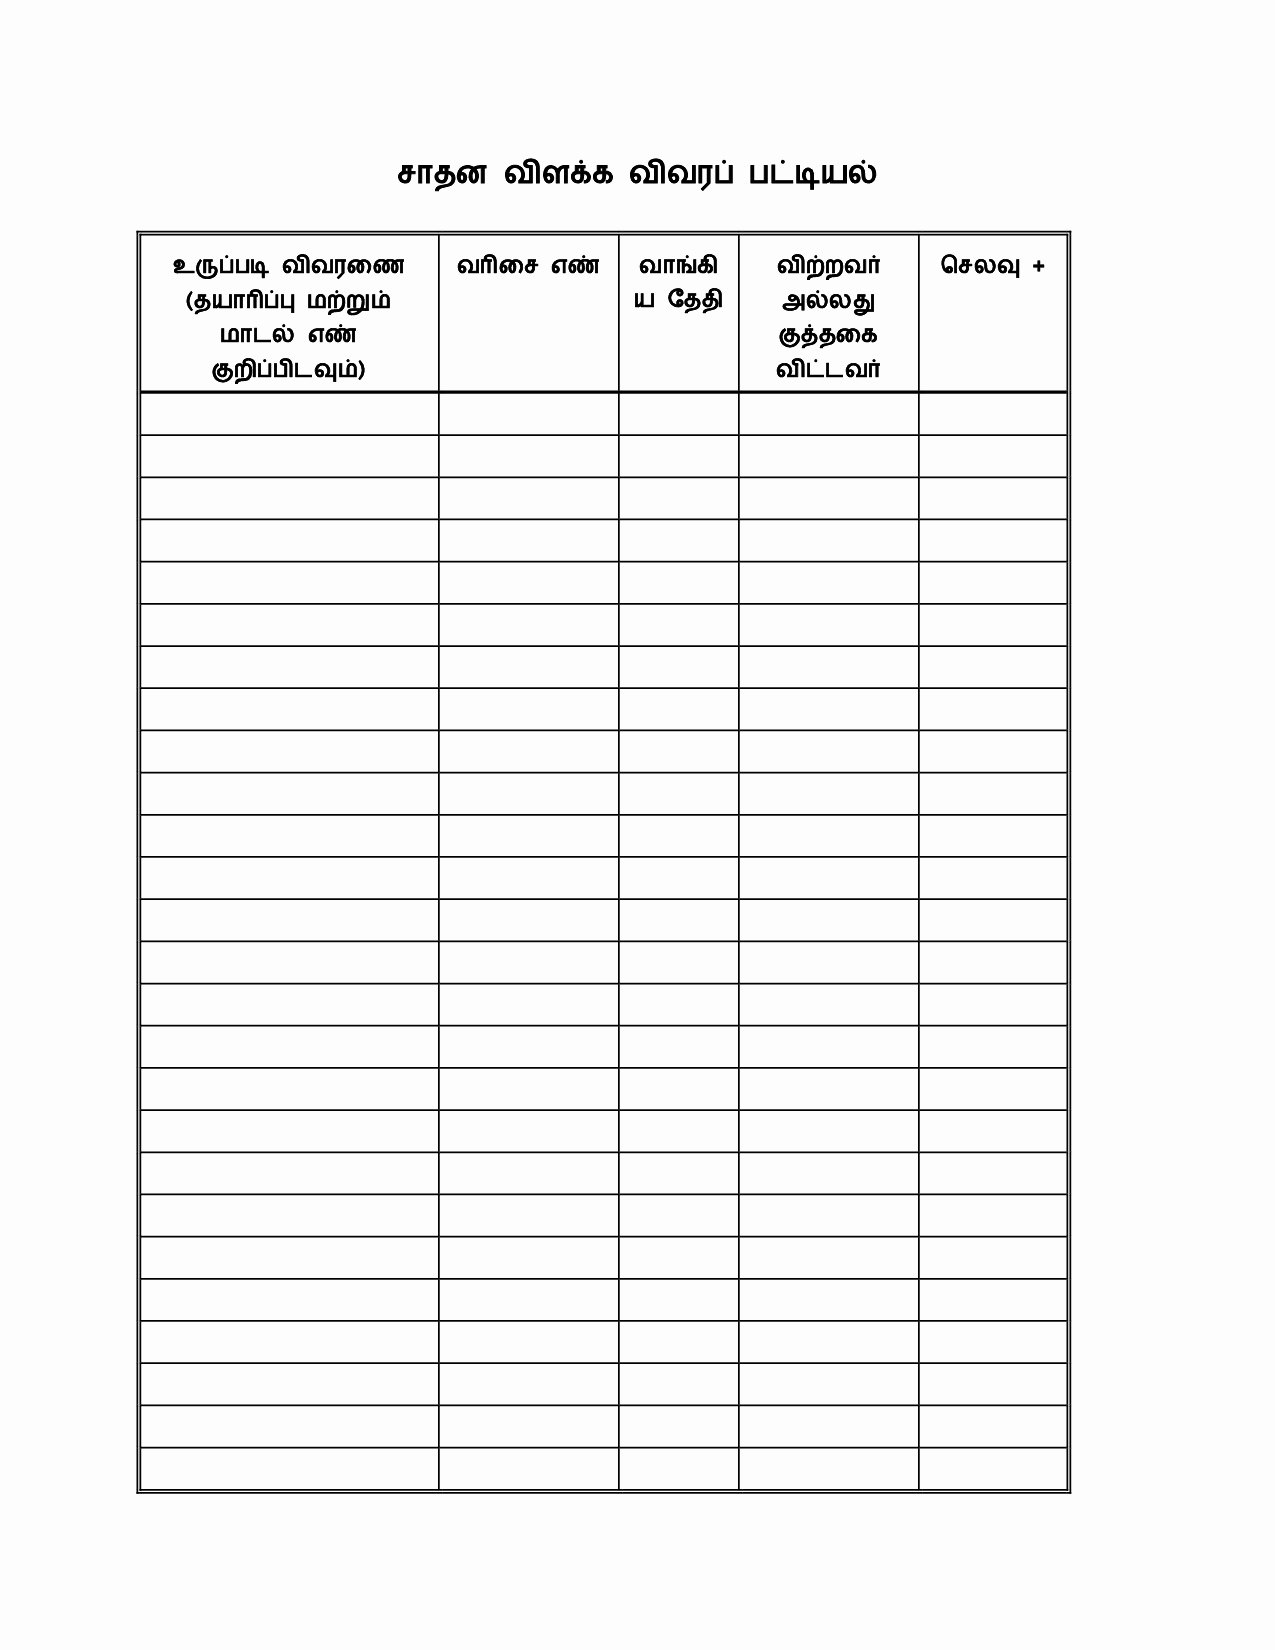 Chemical Inventory List Template New Chemical Inventory List Template